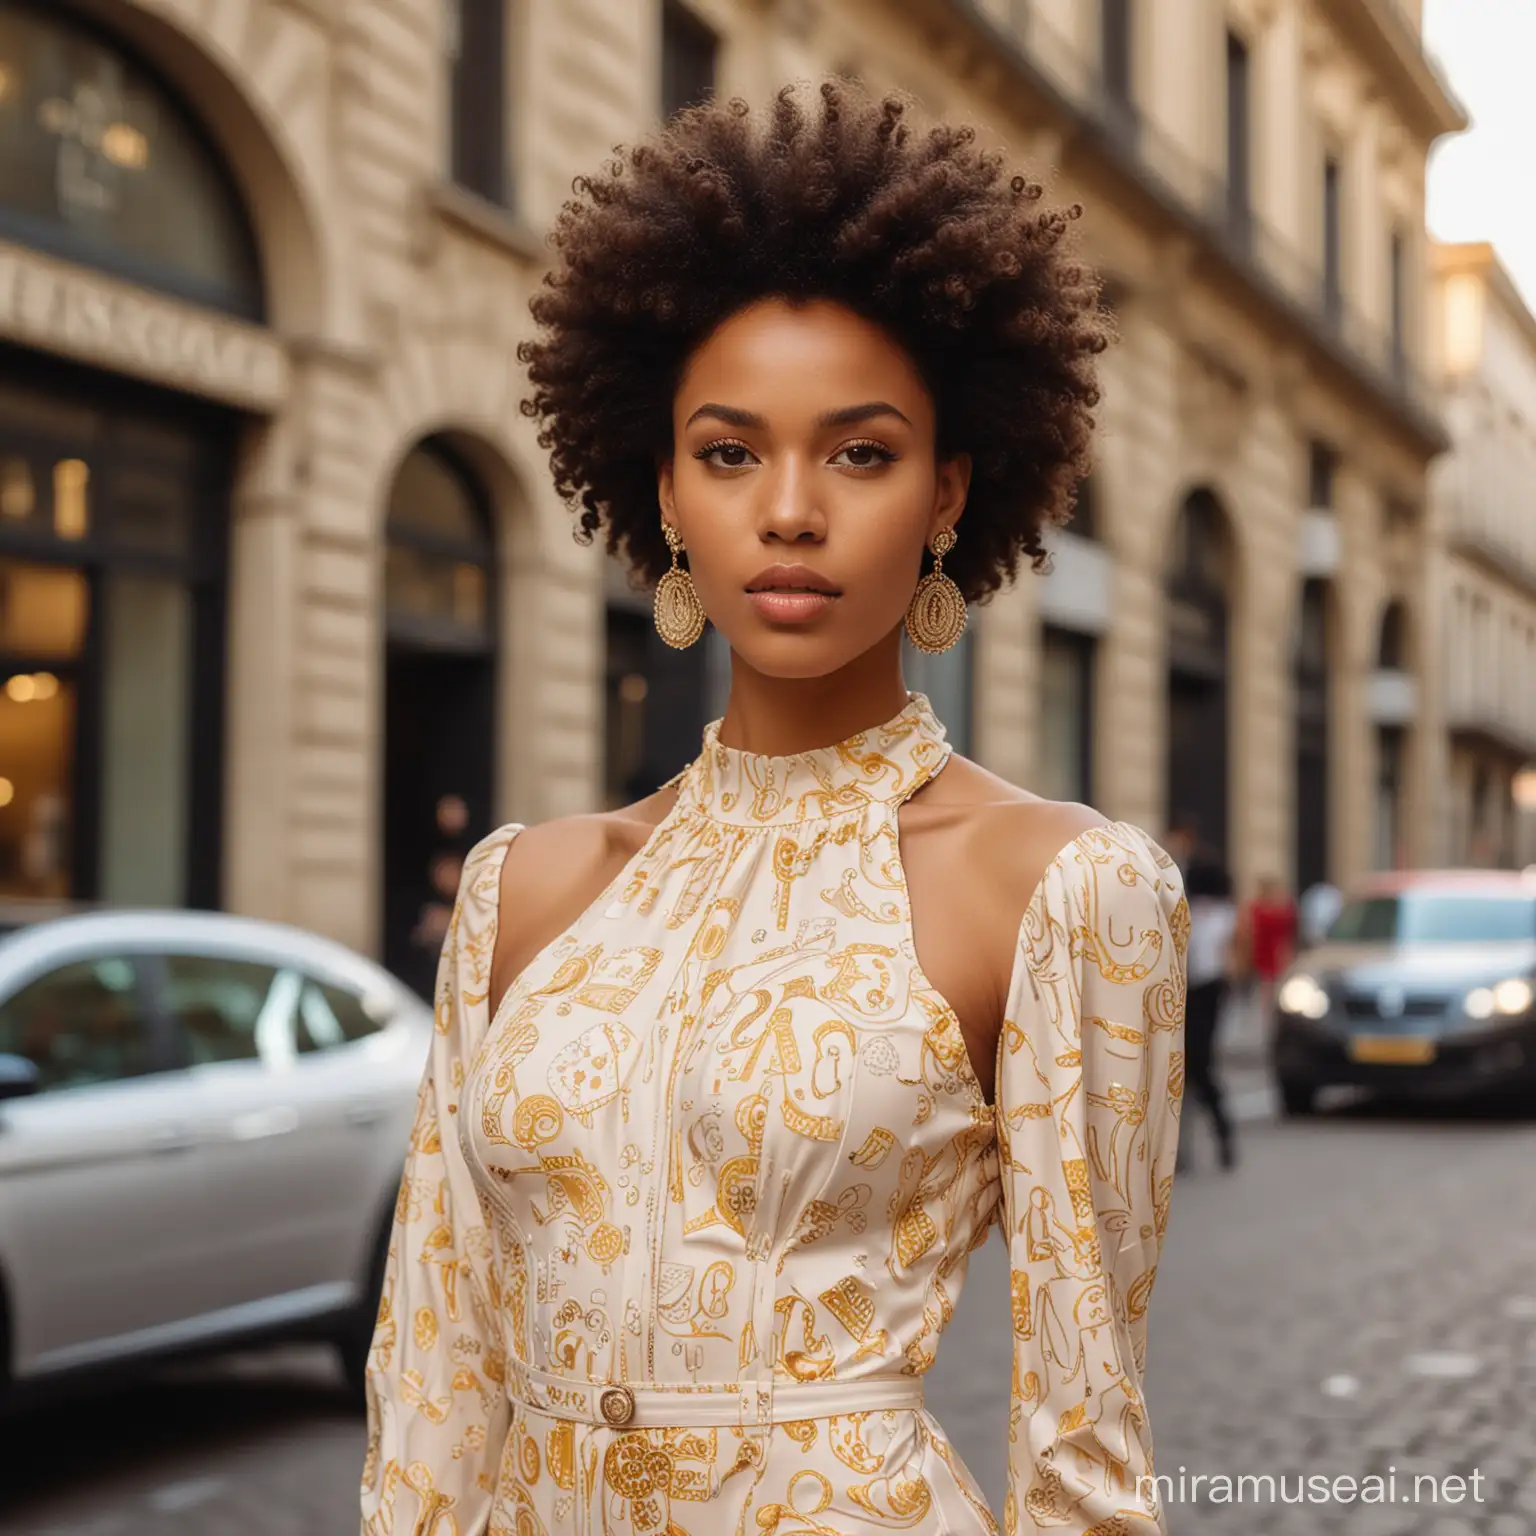 A women super model mixed race , Long and Big volume afro hair, wearing a cream color Versace´s dress, chocolat colors playing with camera looking at camera modeling a small earrings, a Milan 2019 street at background, medium shoot, professional photoshoot